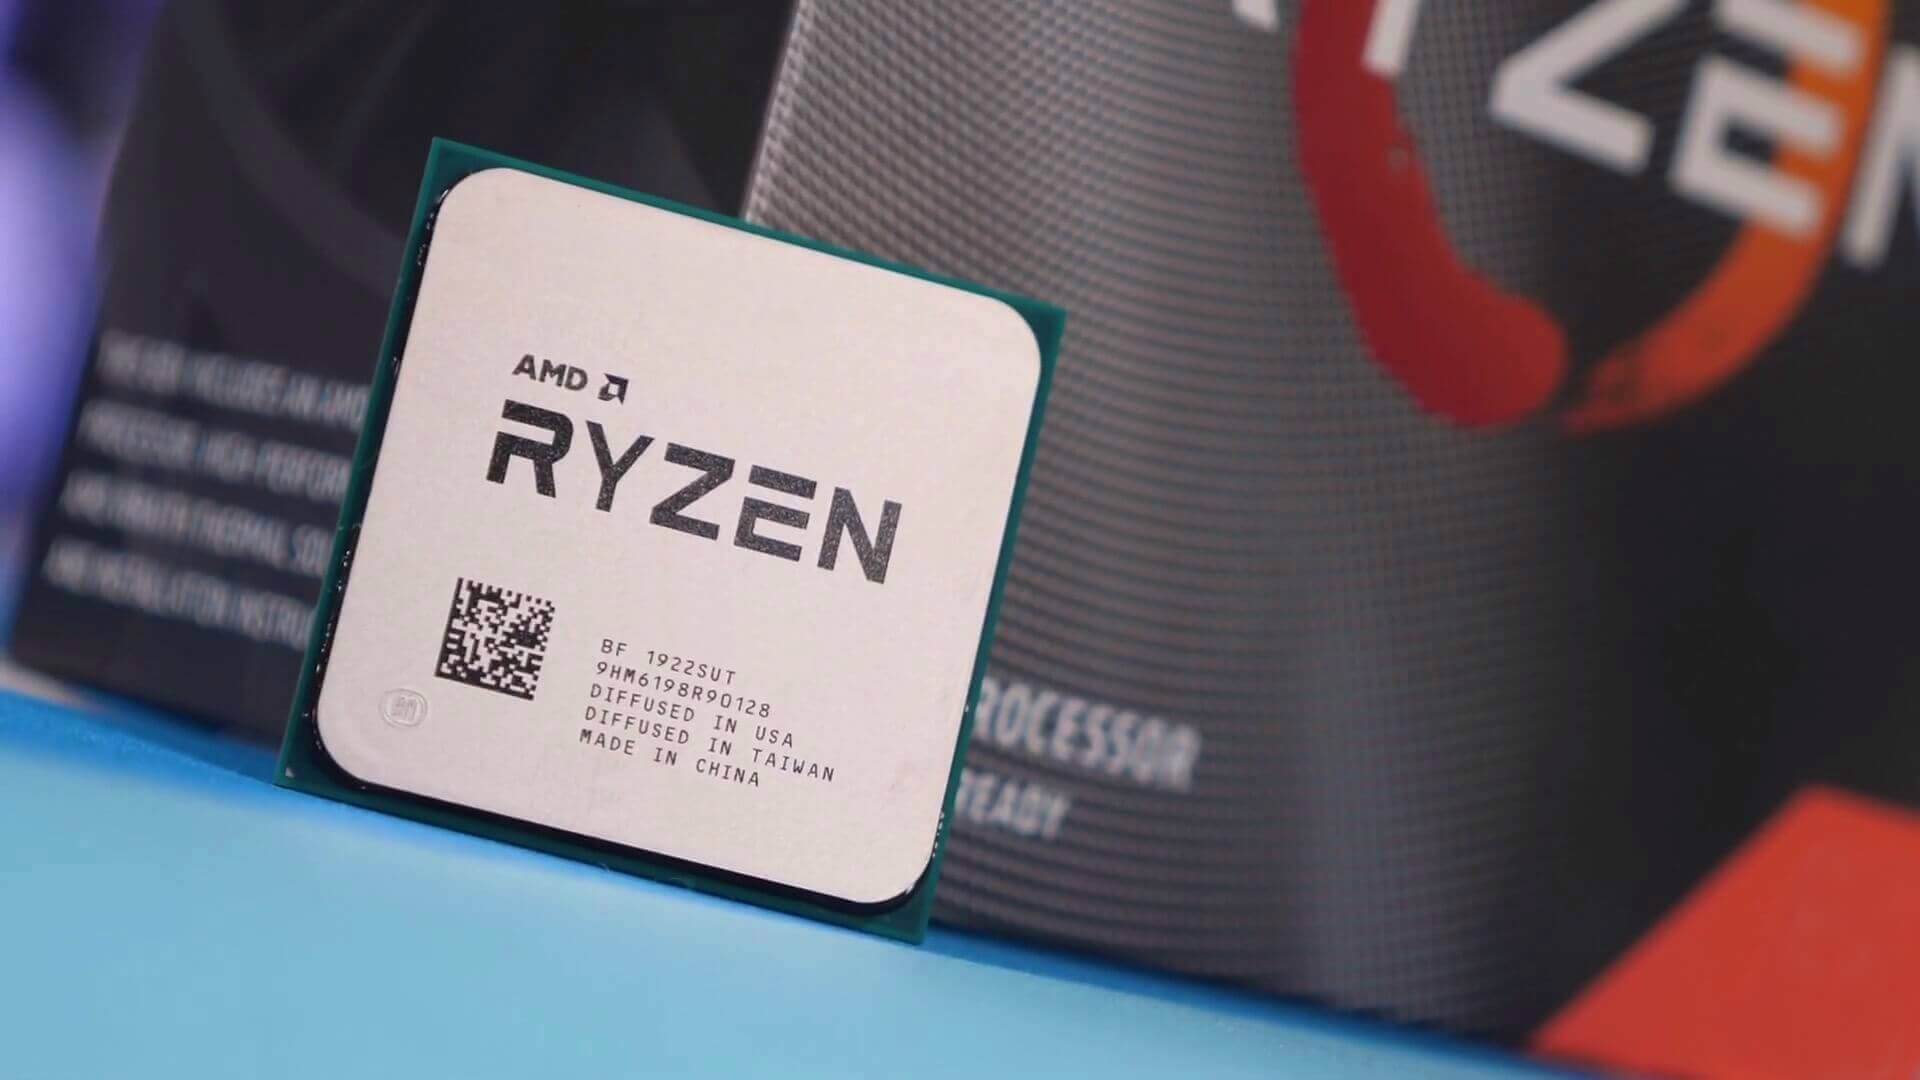 AMD is working on new Ryzen 3 CPUs to rival Intel's Core i3 Comet Lake range